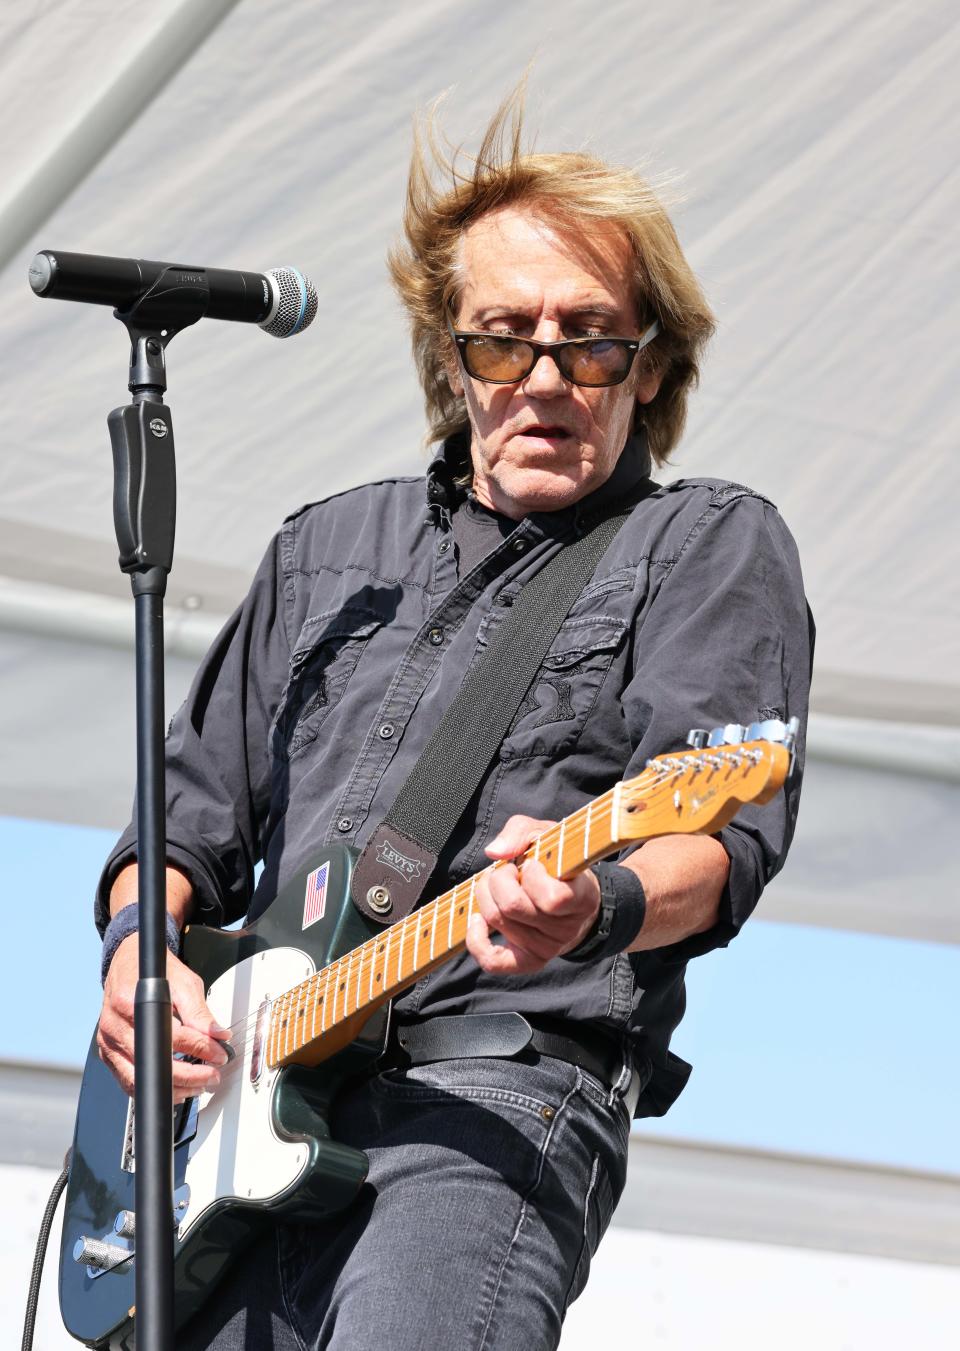 The East Bridgewater Commercial Club SummerFest took place on Sunday, July 10 2022, and featured John Cafferty & The Beaver Brown Band.